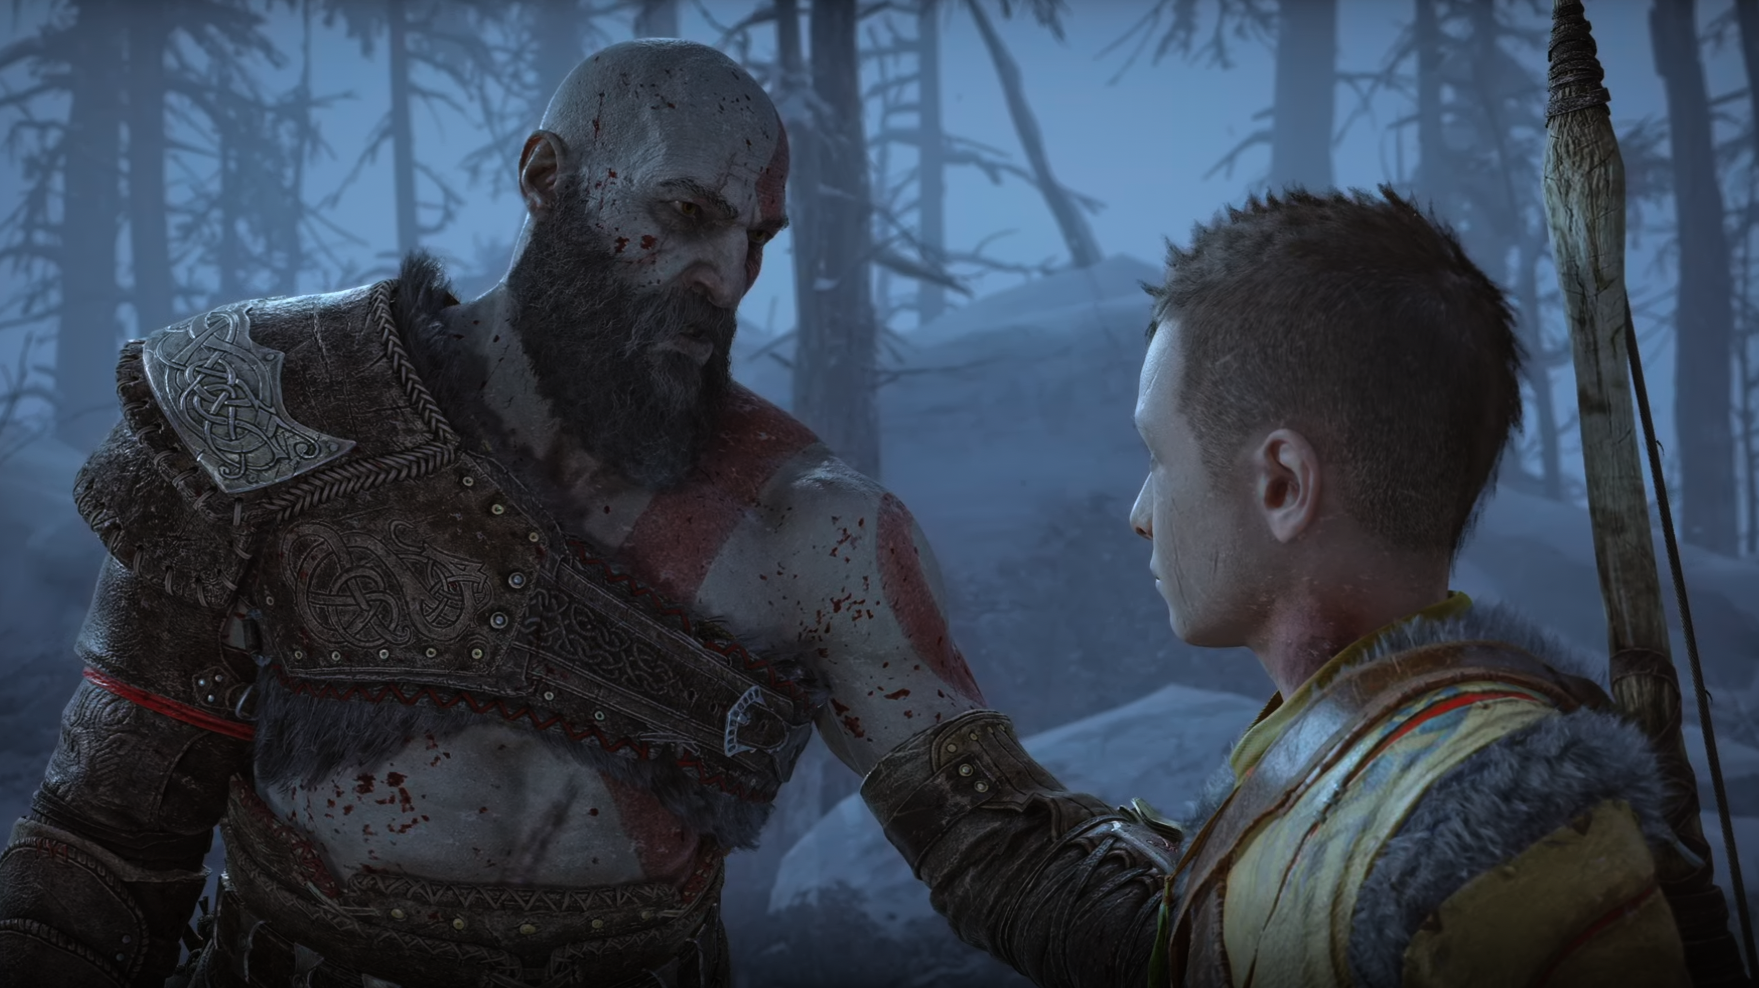 God Of War: Ragnarok's Director Speaks With Us About This Game's